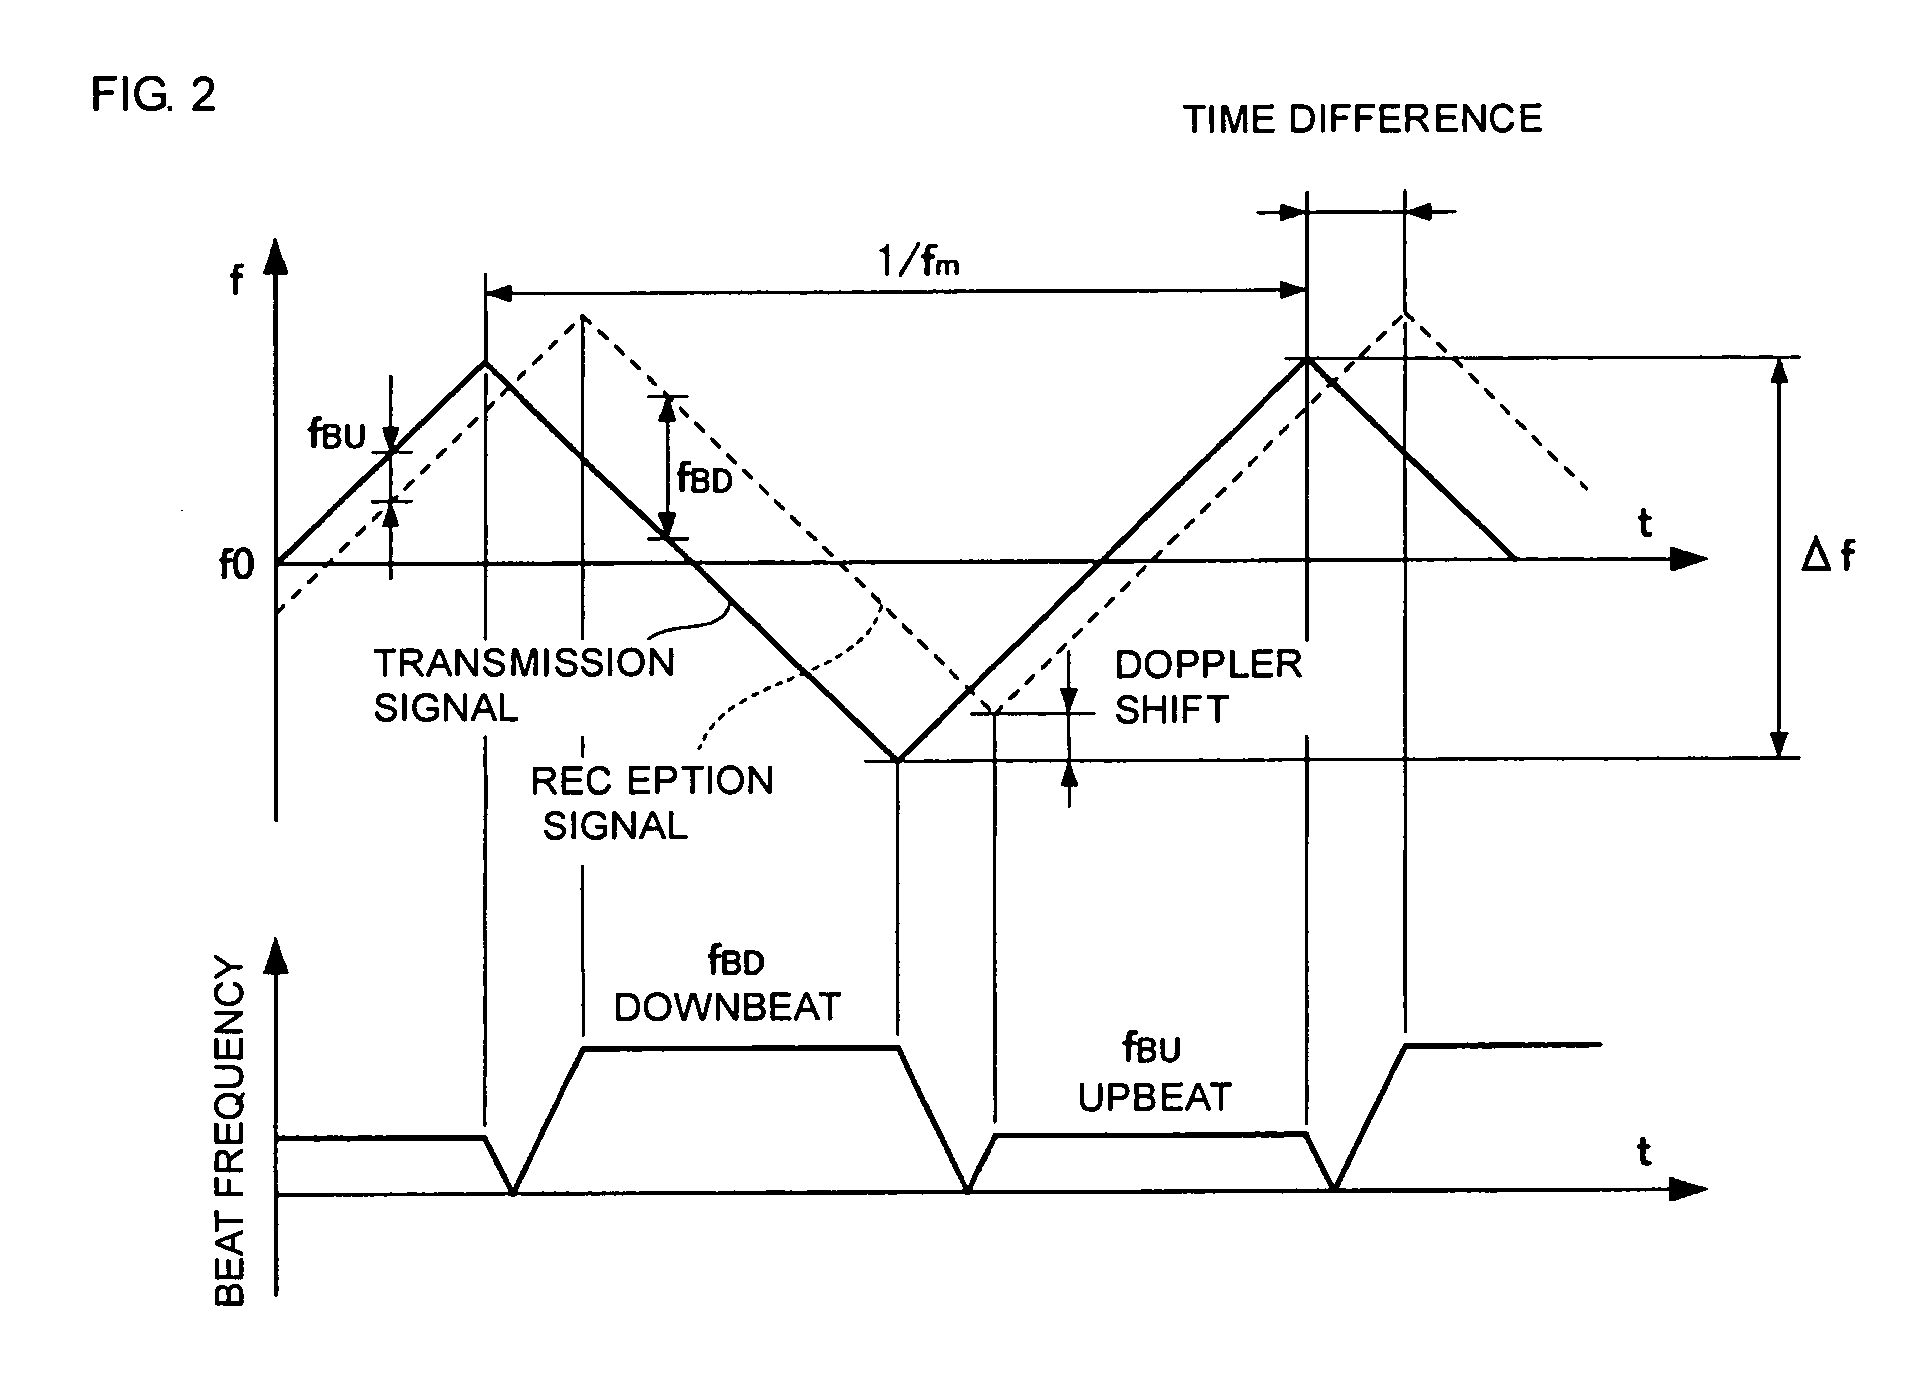 Radar system with peak frequency analysis and window functions